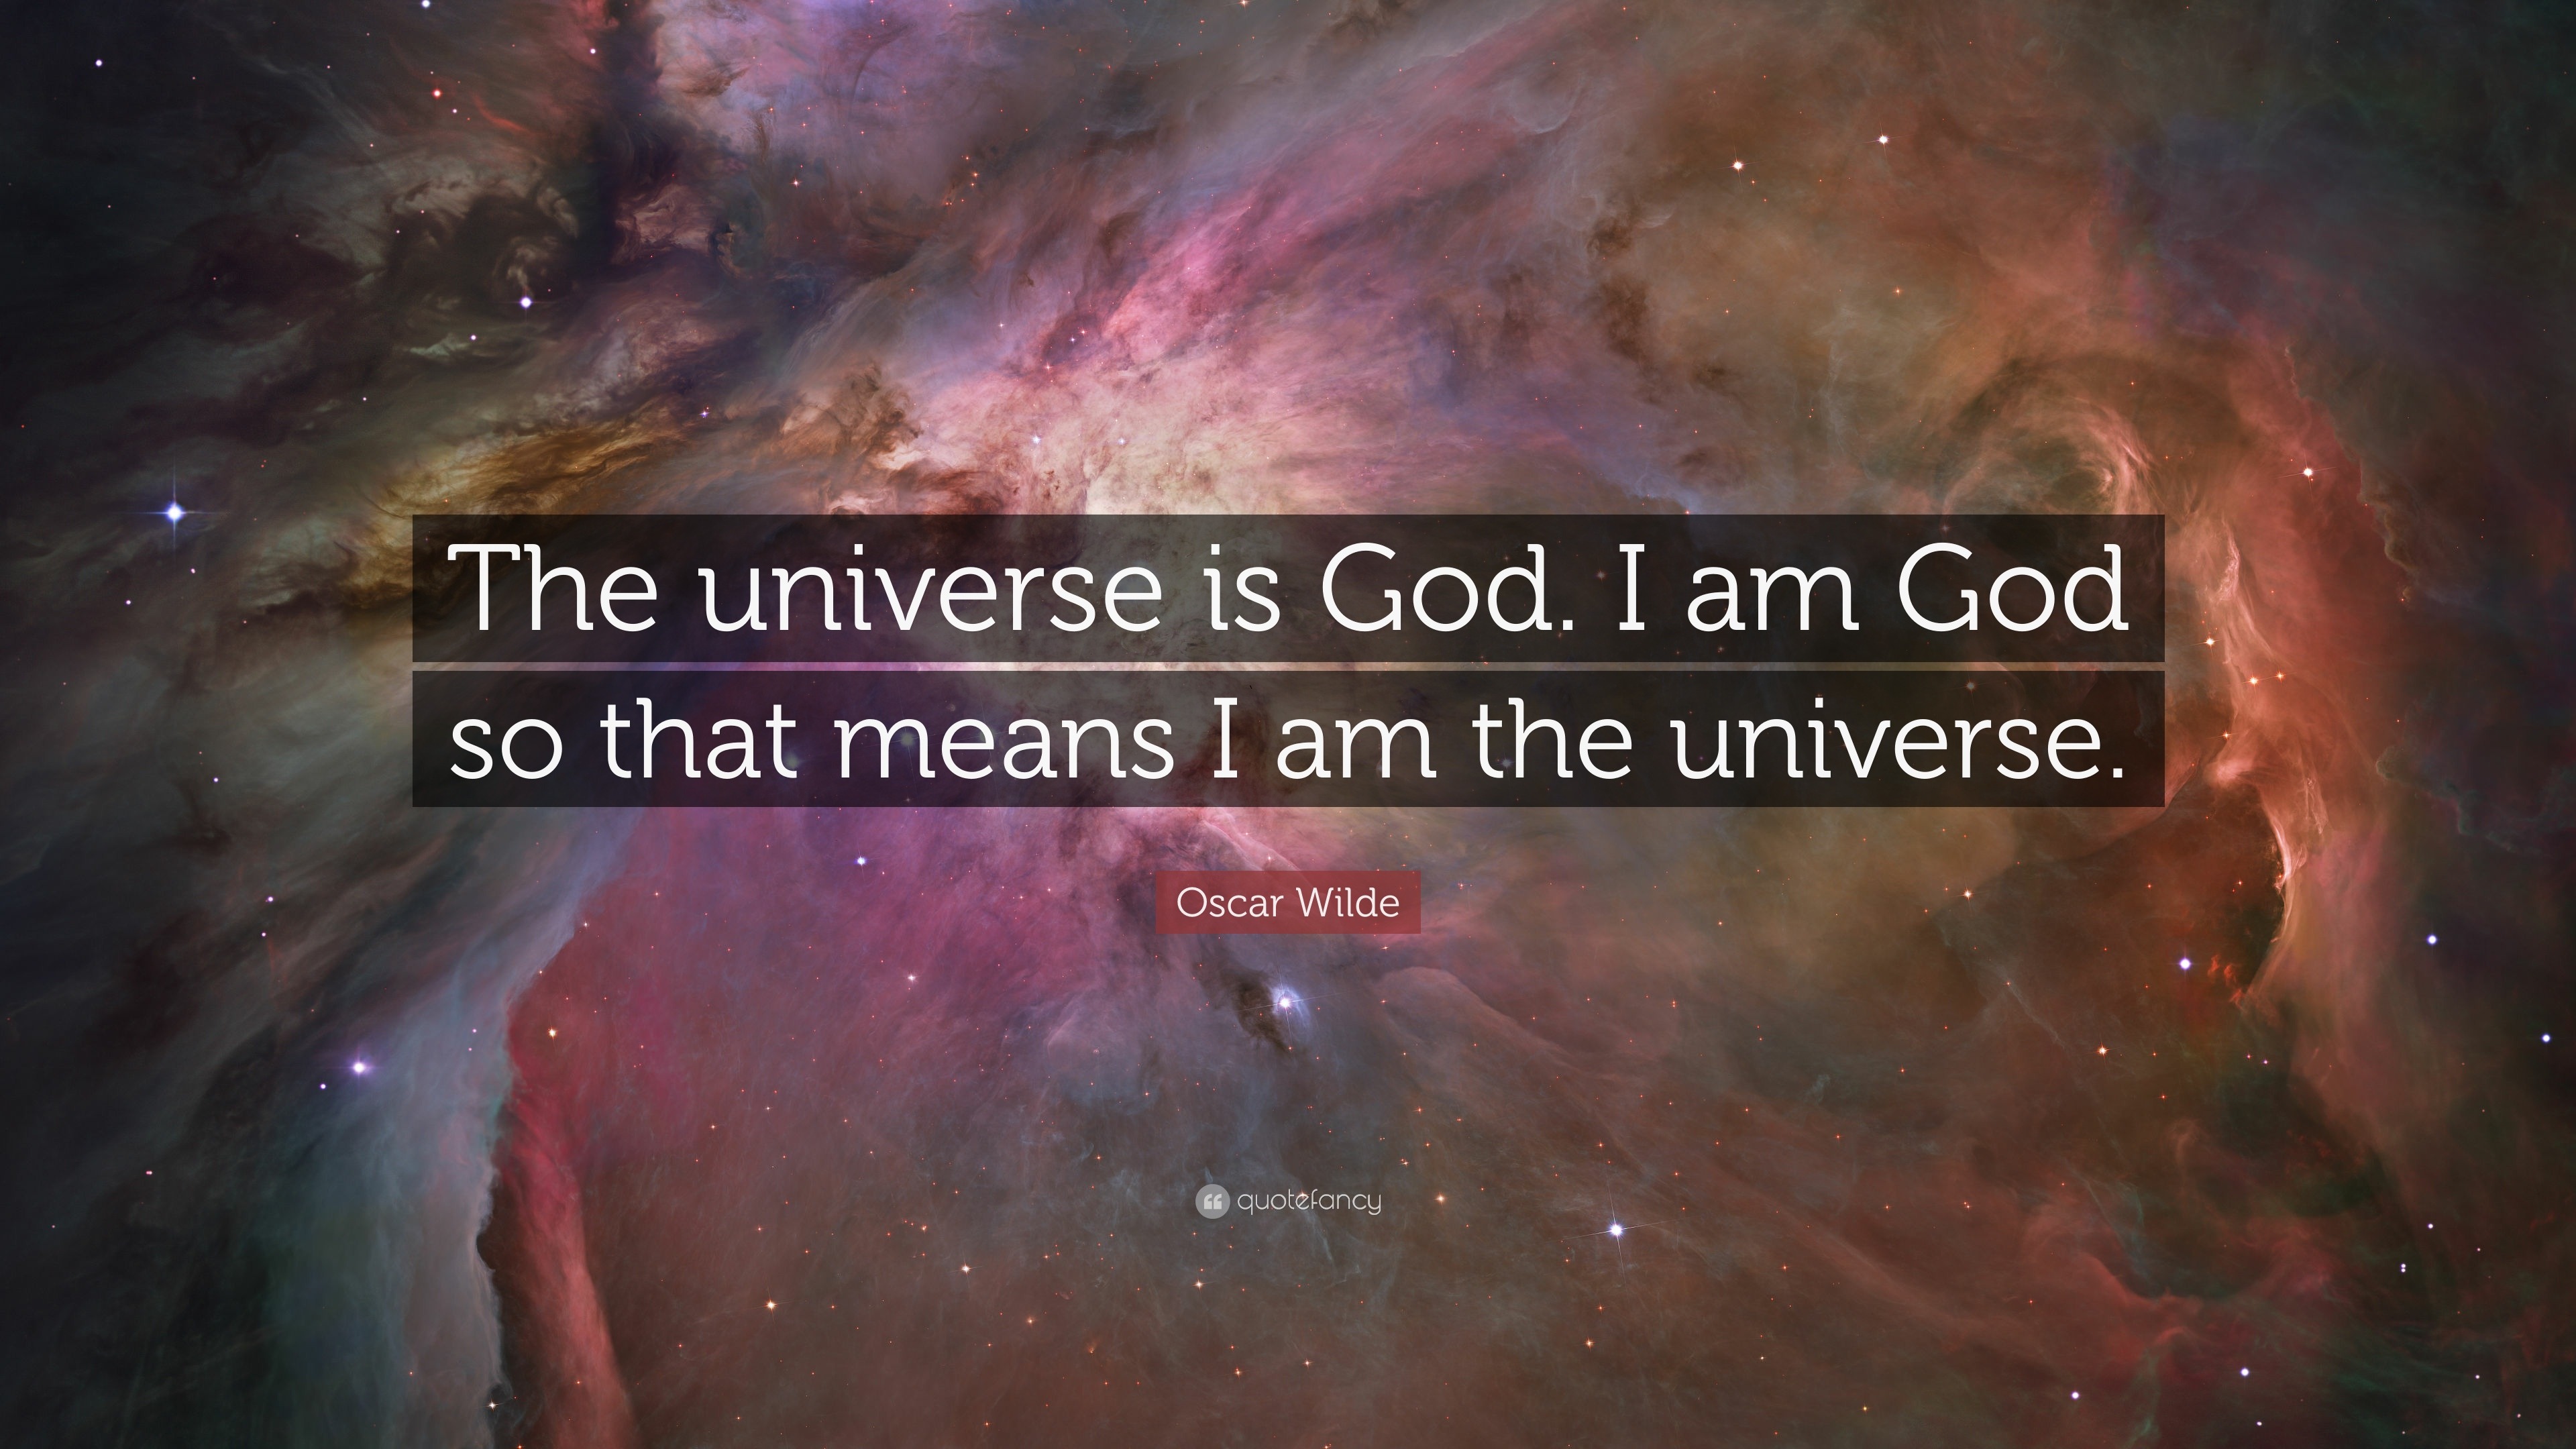 Who is god of the universe?